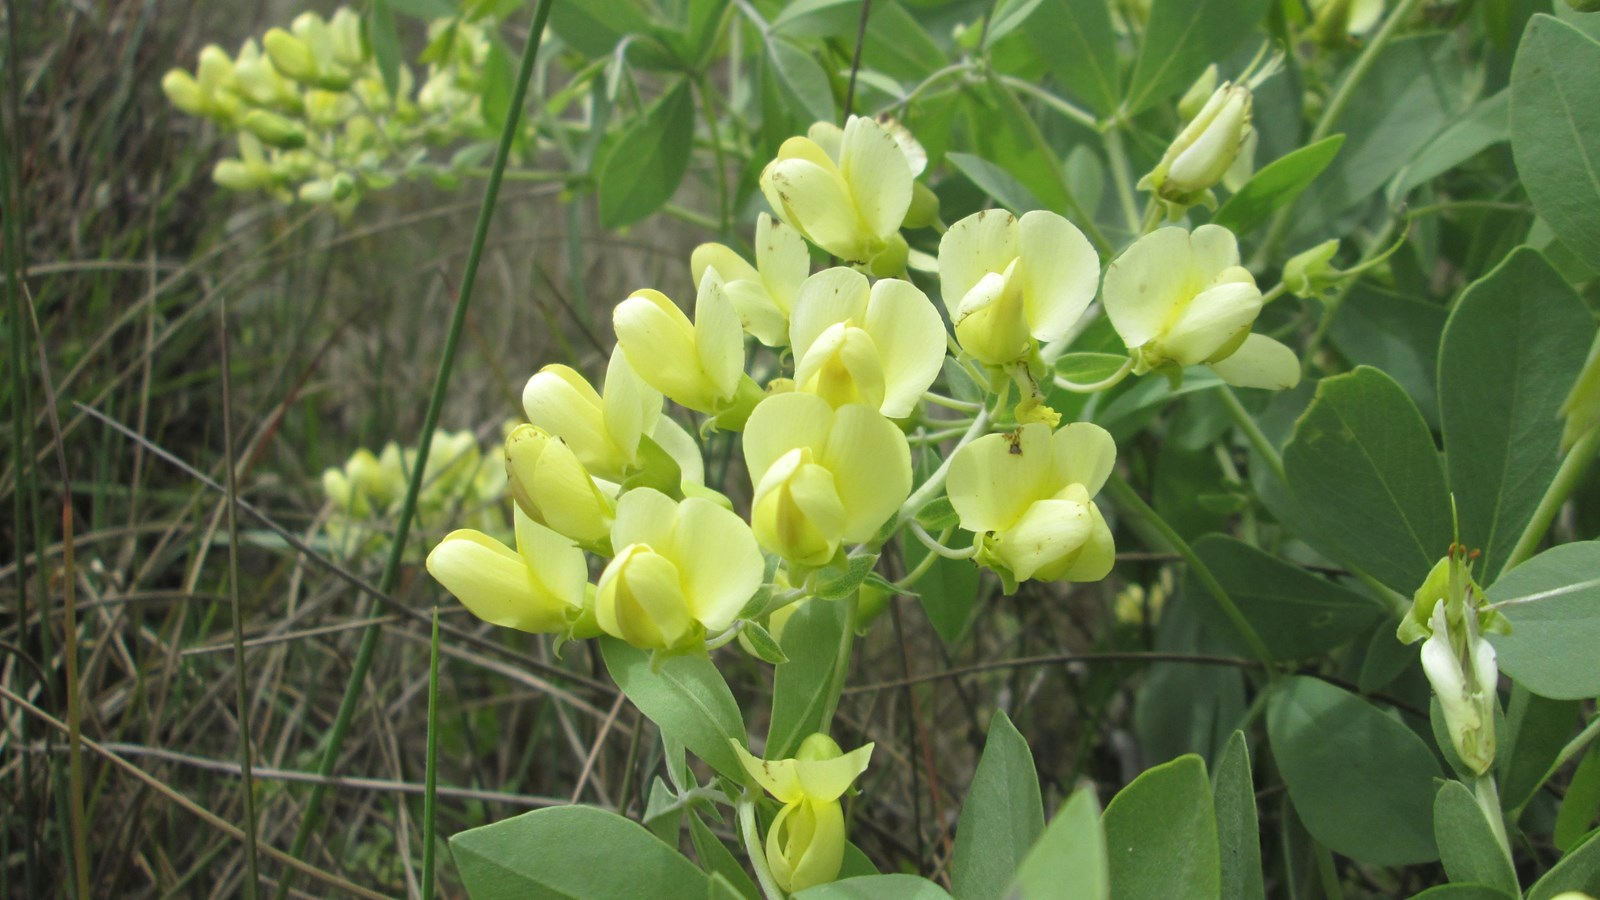 A leafy green plant with pale yellow flowers.